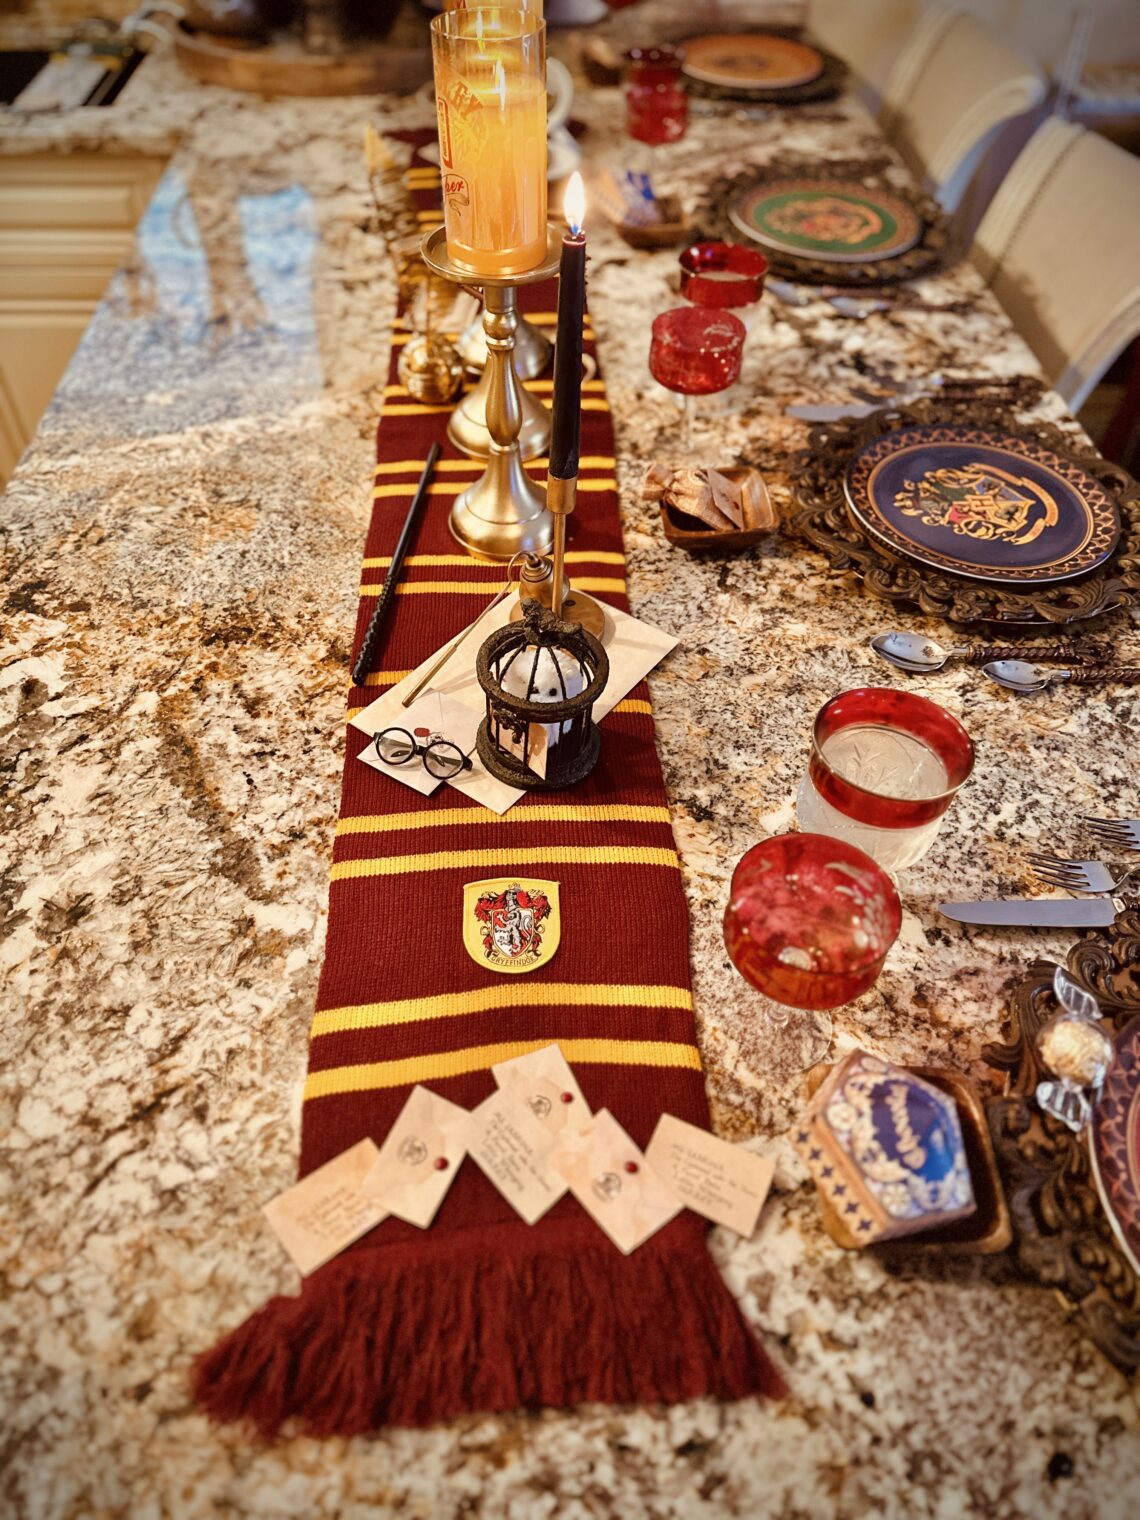 Hogwarts House Harry Potter Quidditch Candles table centerpiece